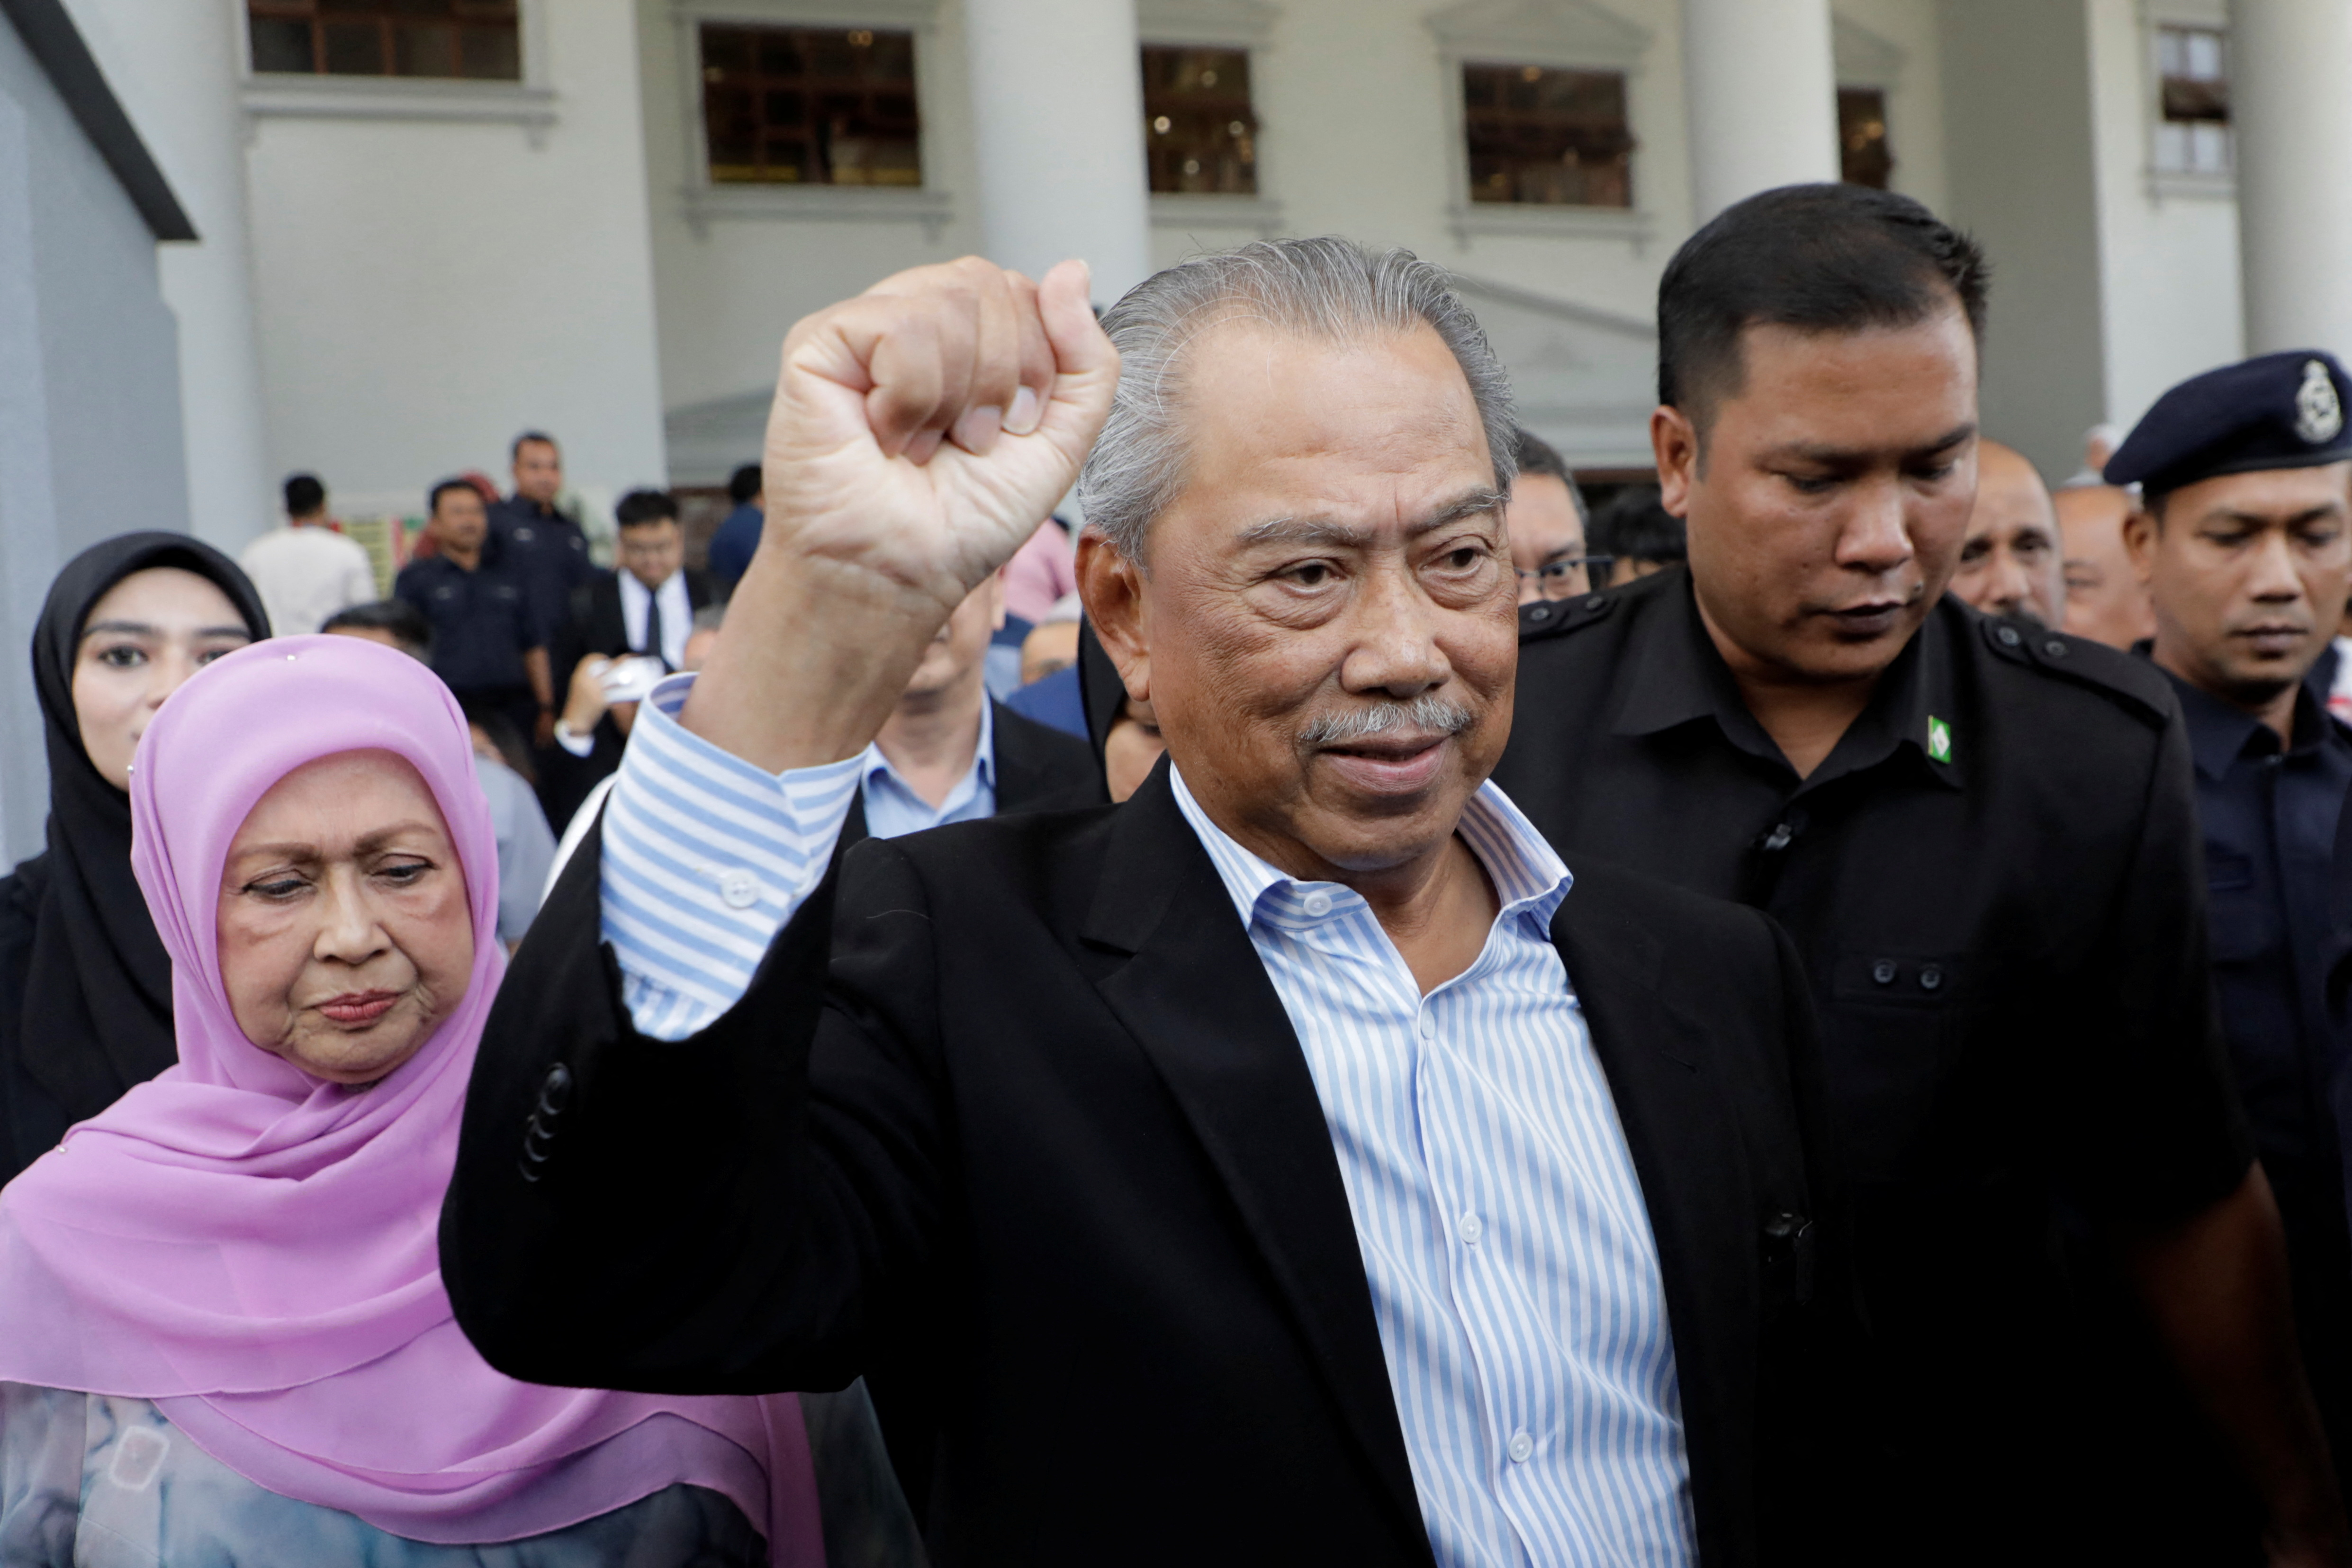 Analysis With another ex-prime minister charged, Malaysia risks further turmoil Reuters